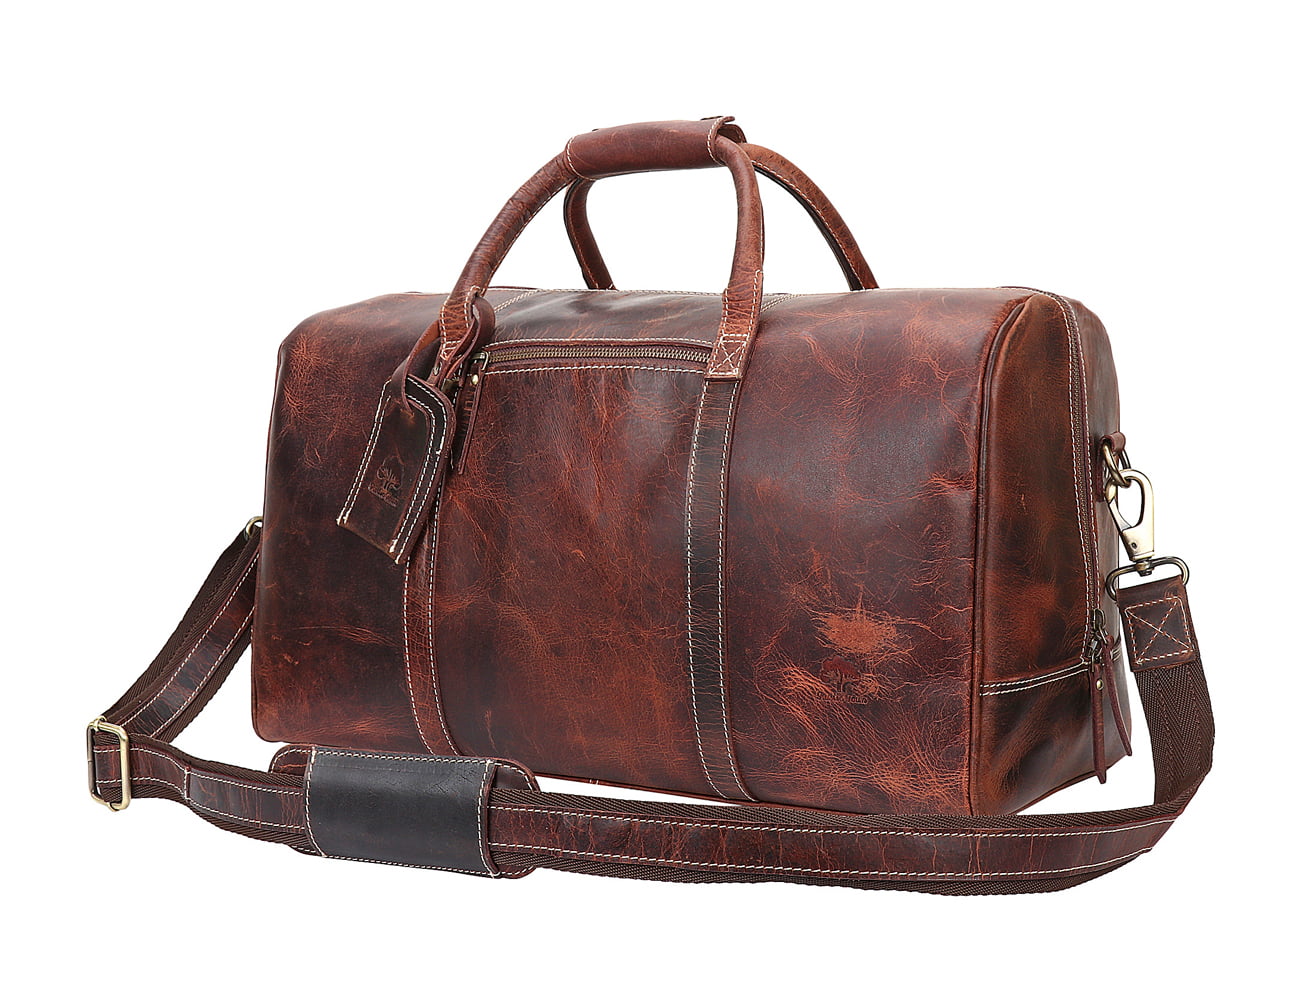 Rustic Town Genuine Leather Handmade Duffel Bag Airplane Carry On ...